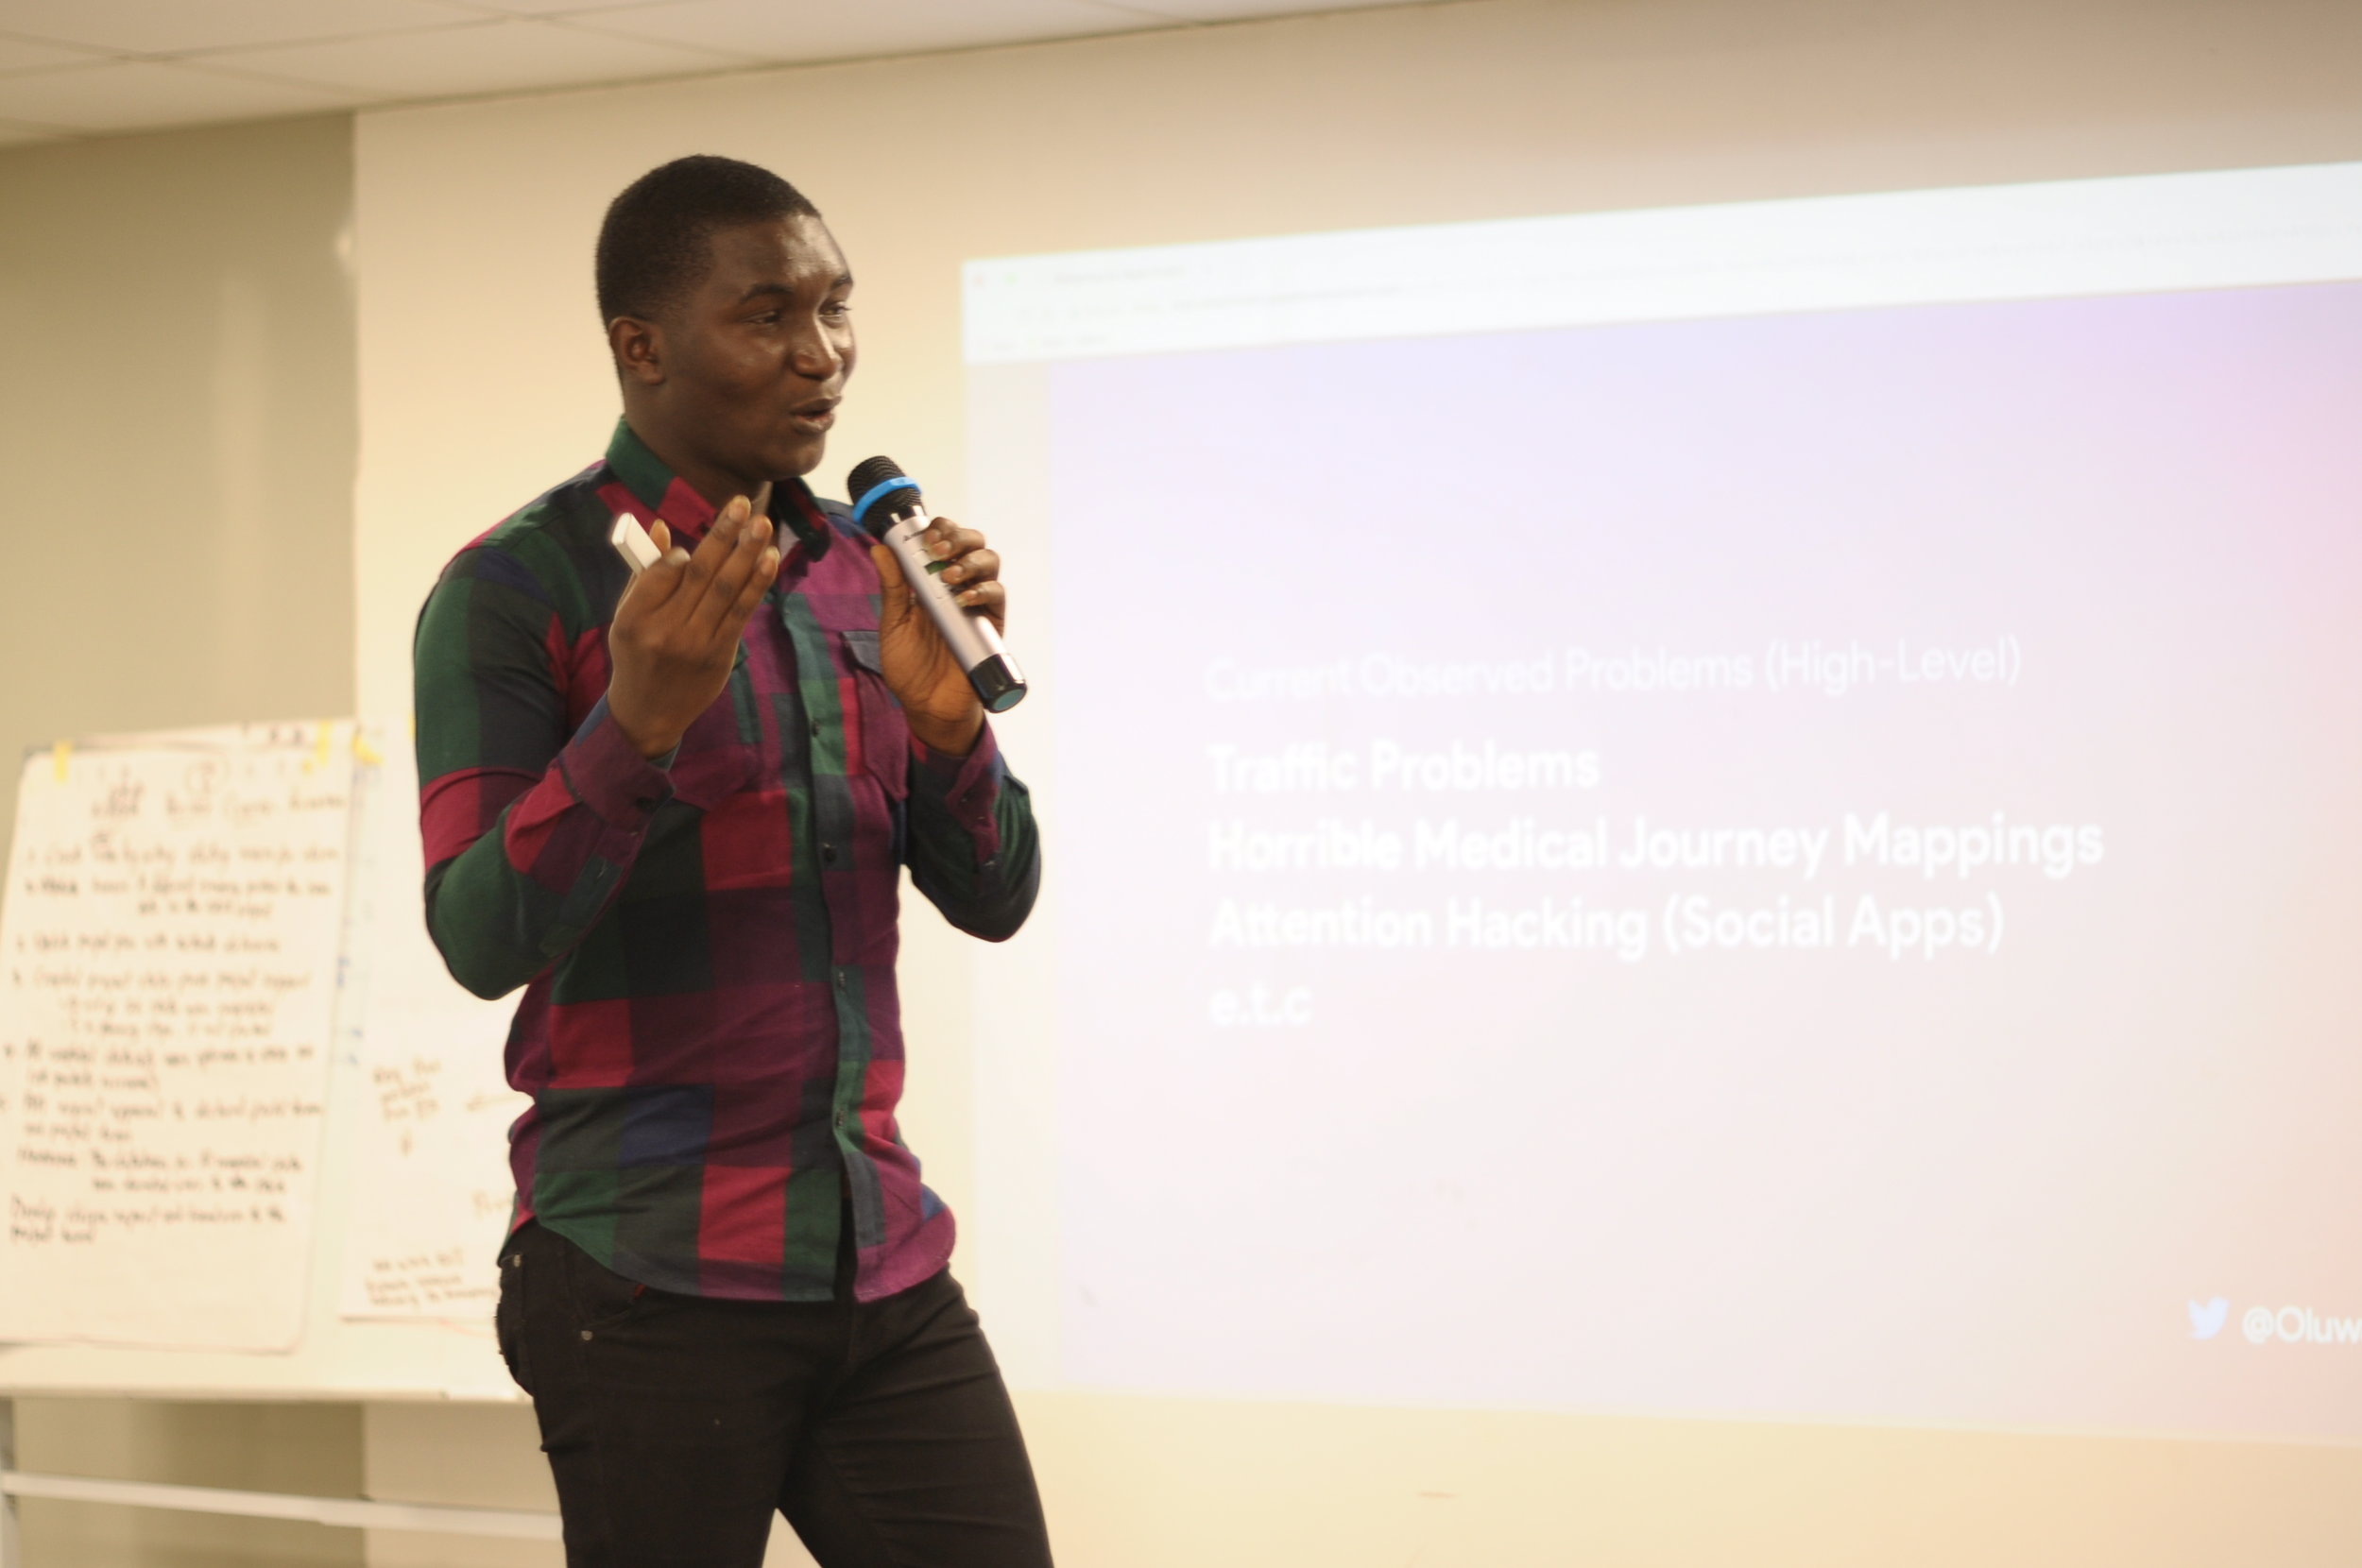  The second presentation, Designing for the Right Problems, was from Oluwatobi Akindunjoye  